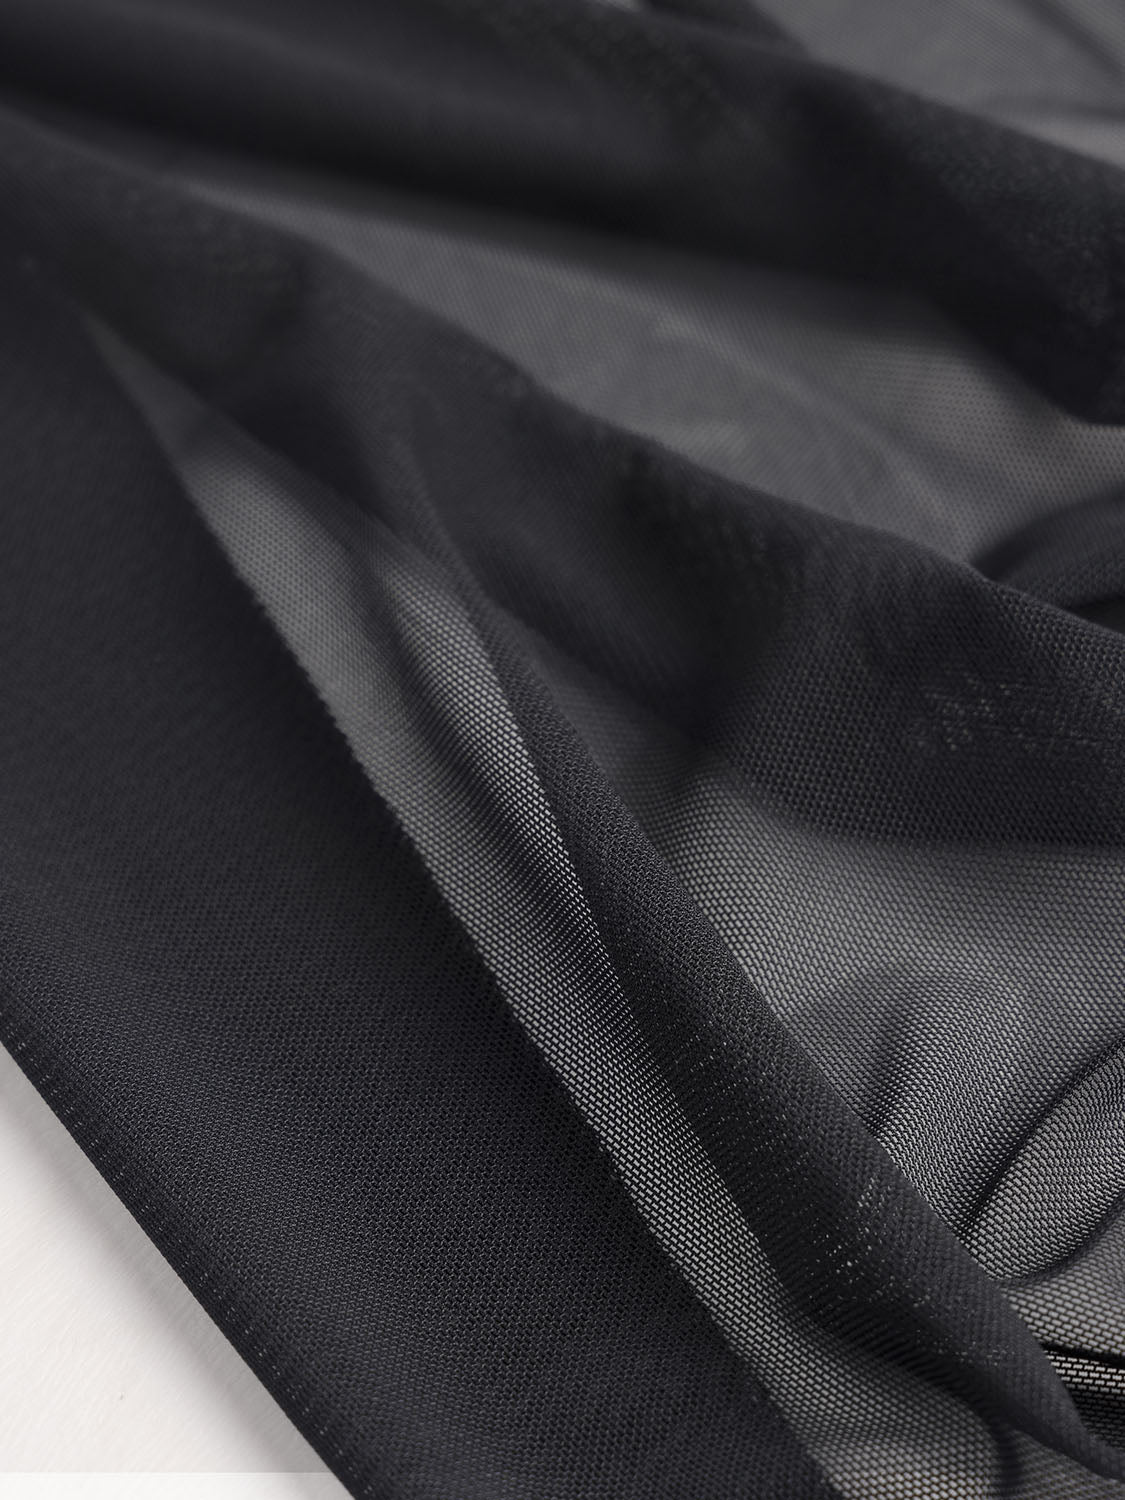 Stretch Recycled Polyester Jersey for Lining — Fabric Sight